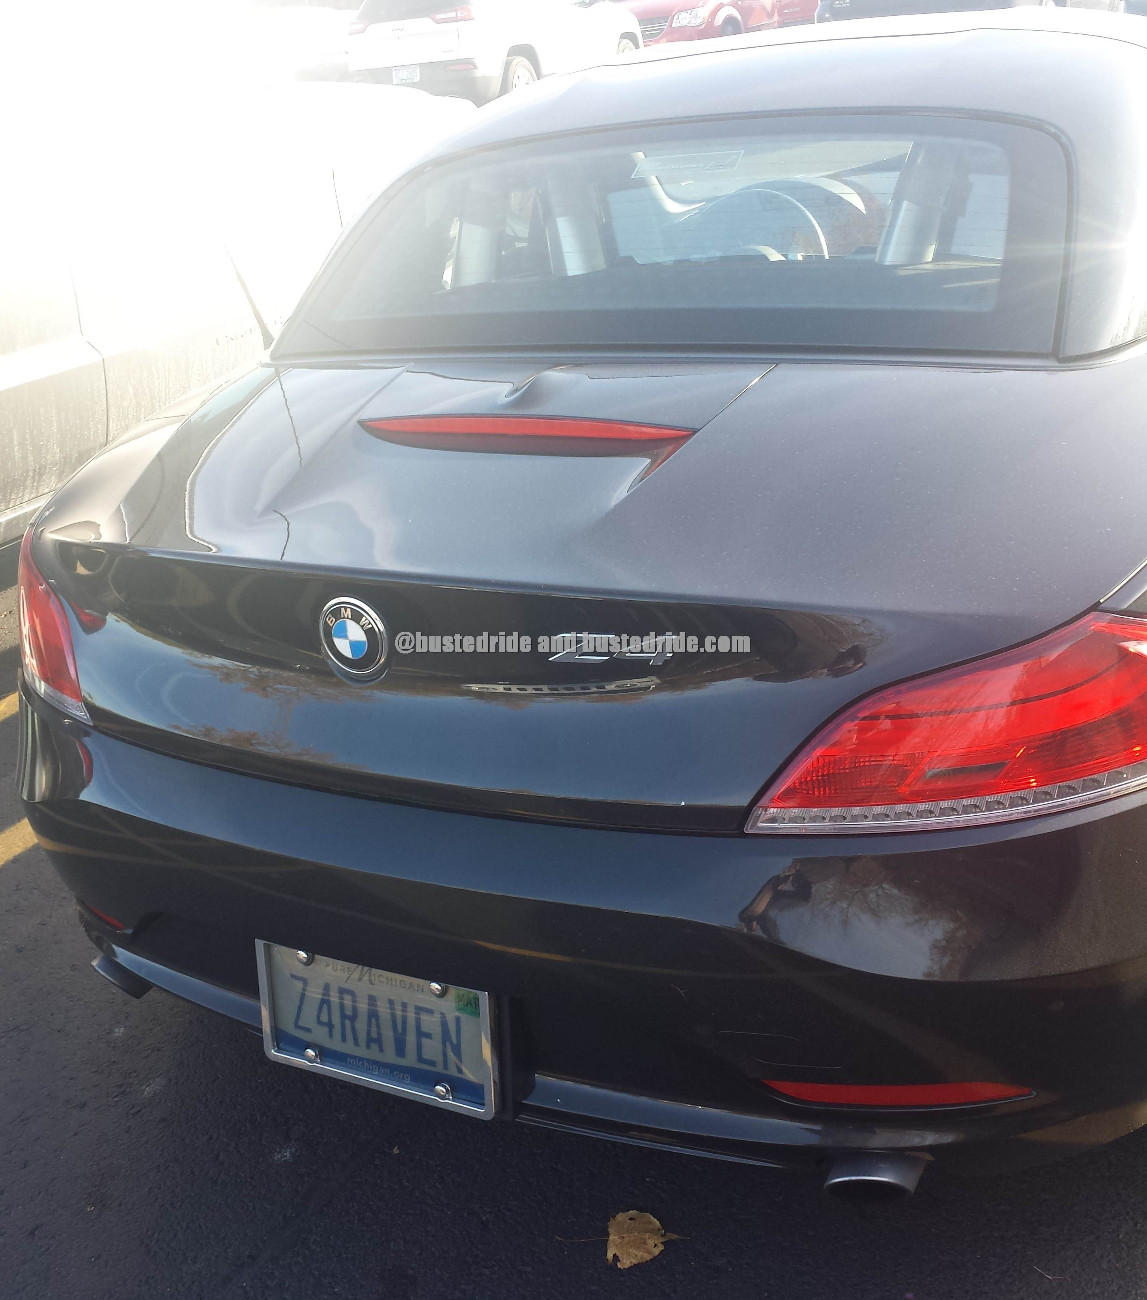 Z4RAVEN - Vanity License Plate by Busted Ride